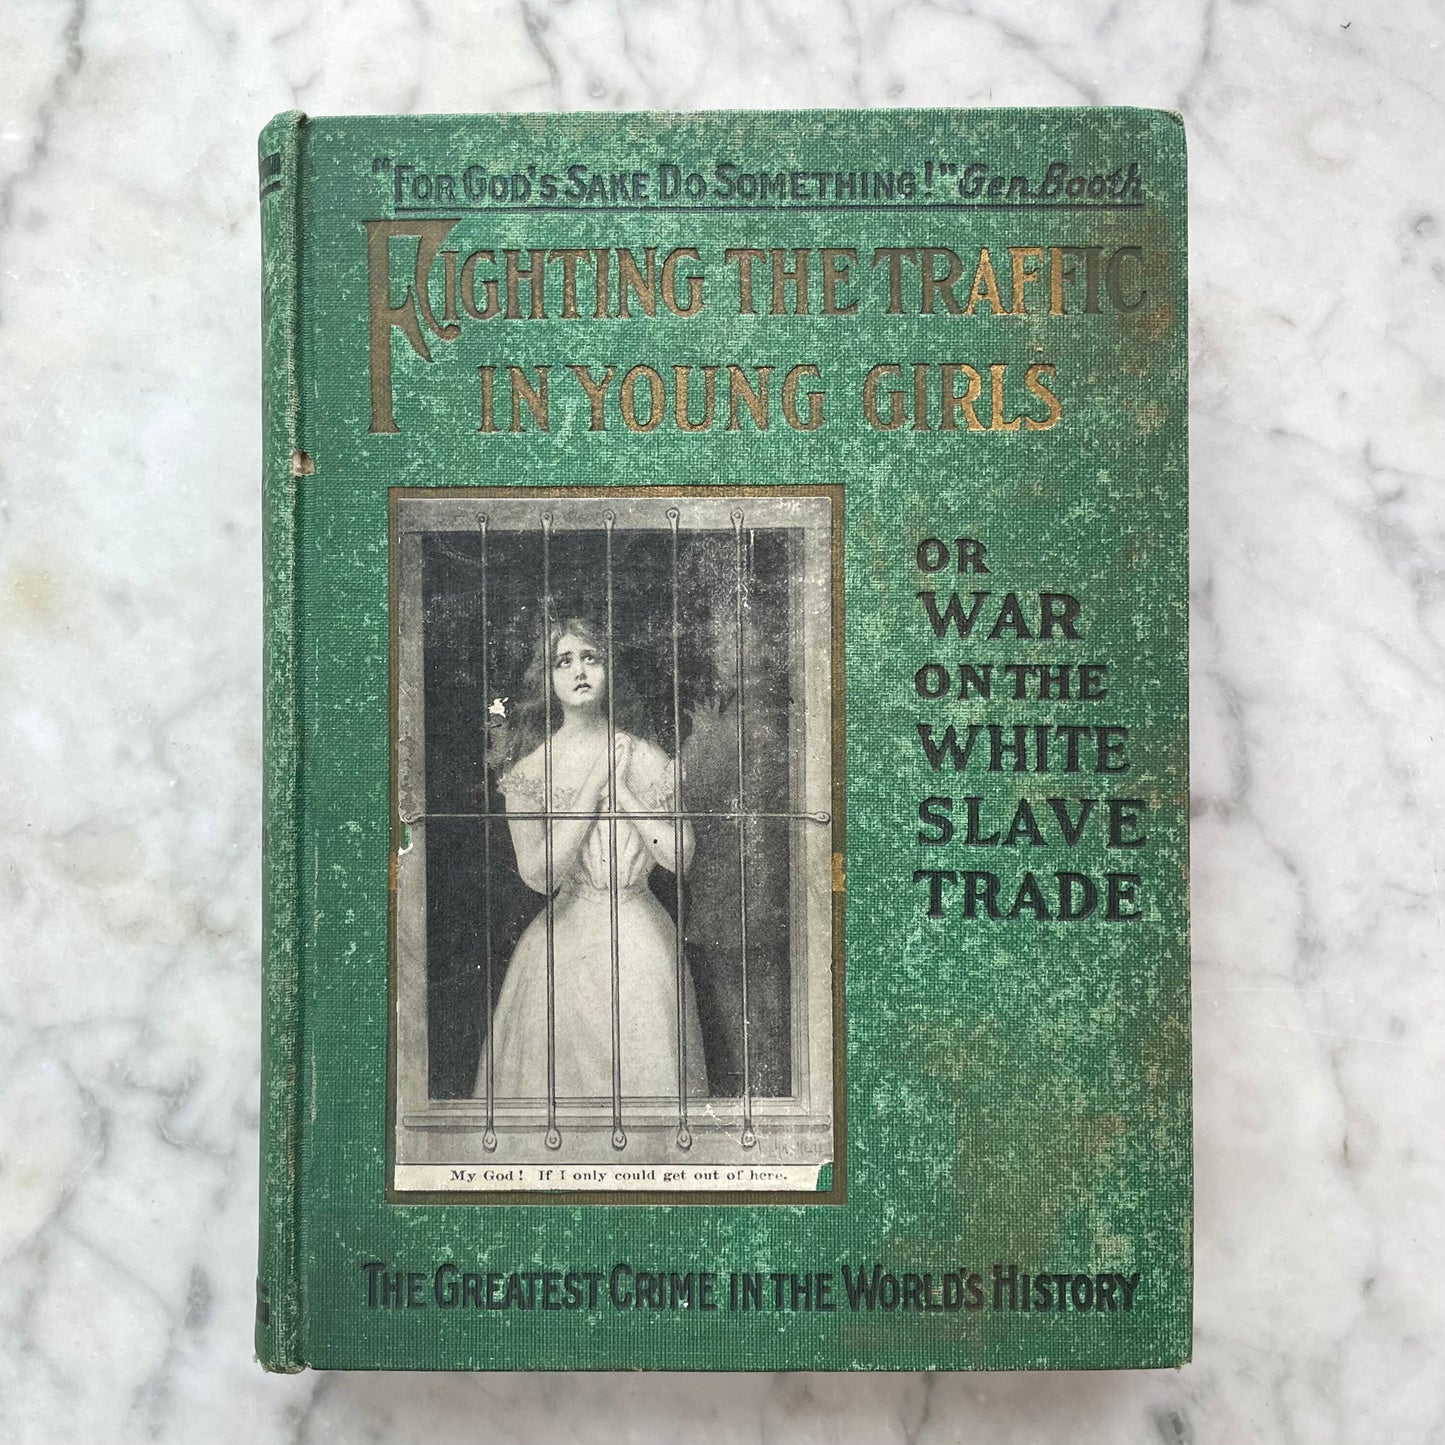 Fighting the Traffic in Young Girls or War on the White Slave Trade by Ernest A. Bell, 1911